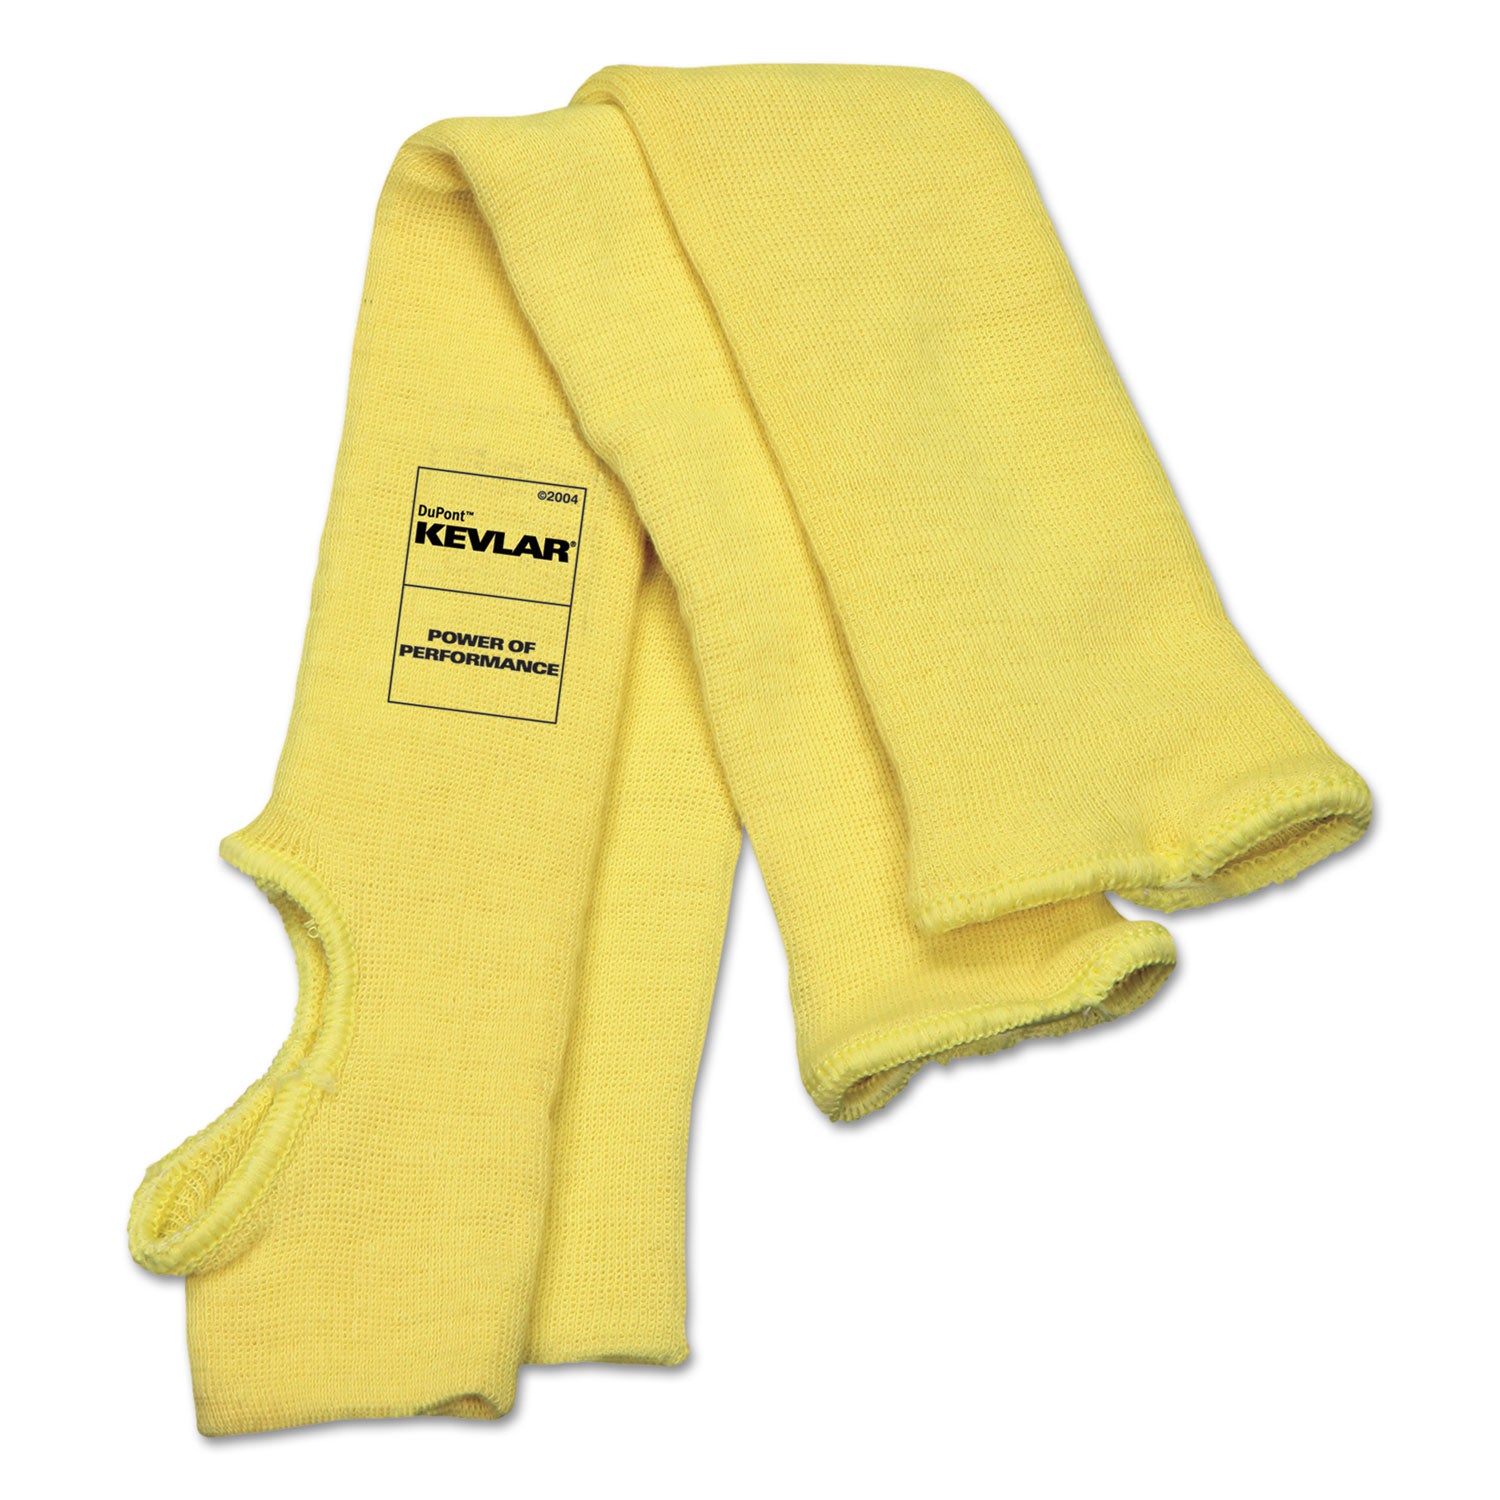 economy-series-dupont-kevlar-fiber-sleeves-one-size-fits-all-yellow-1-pair_crw9378te - 1